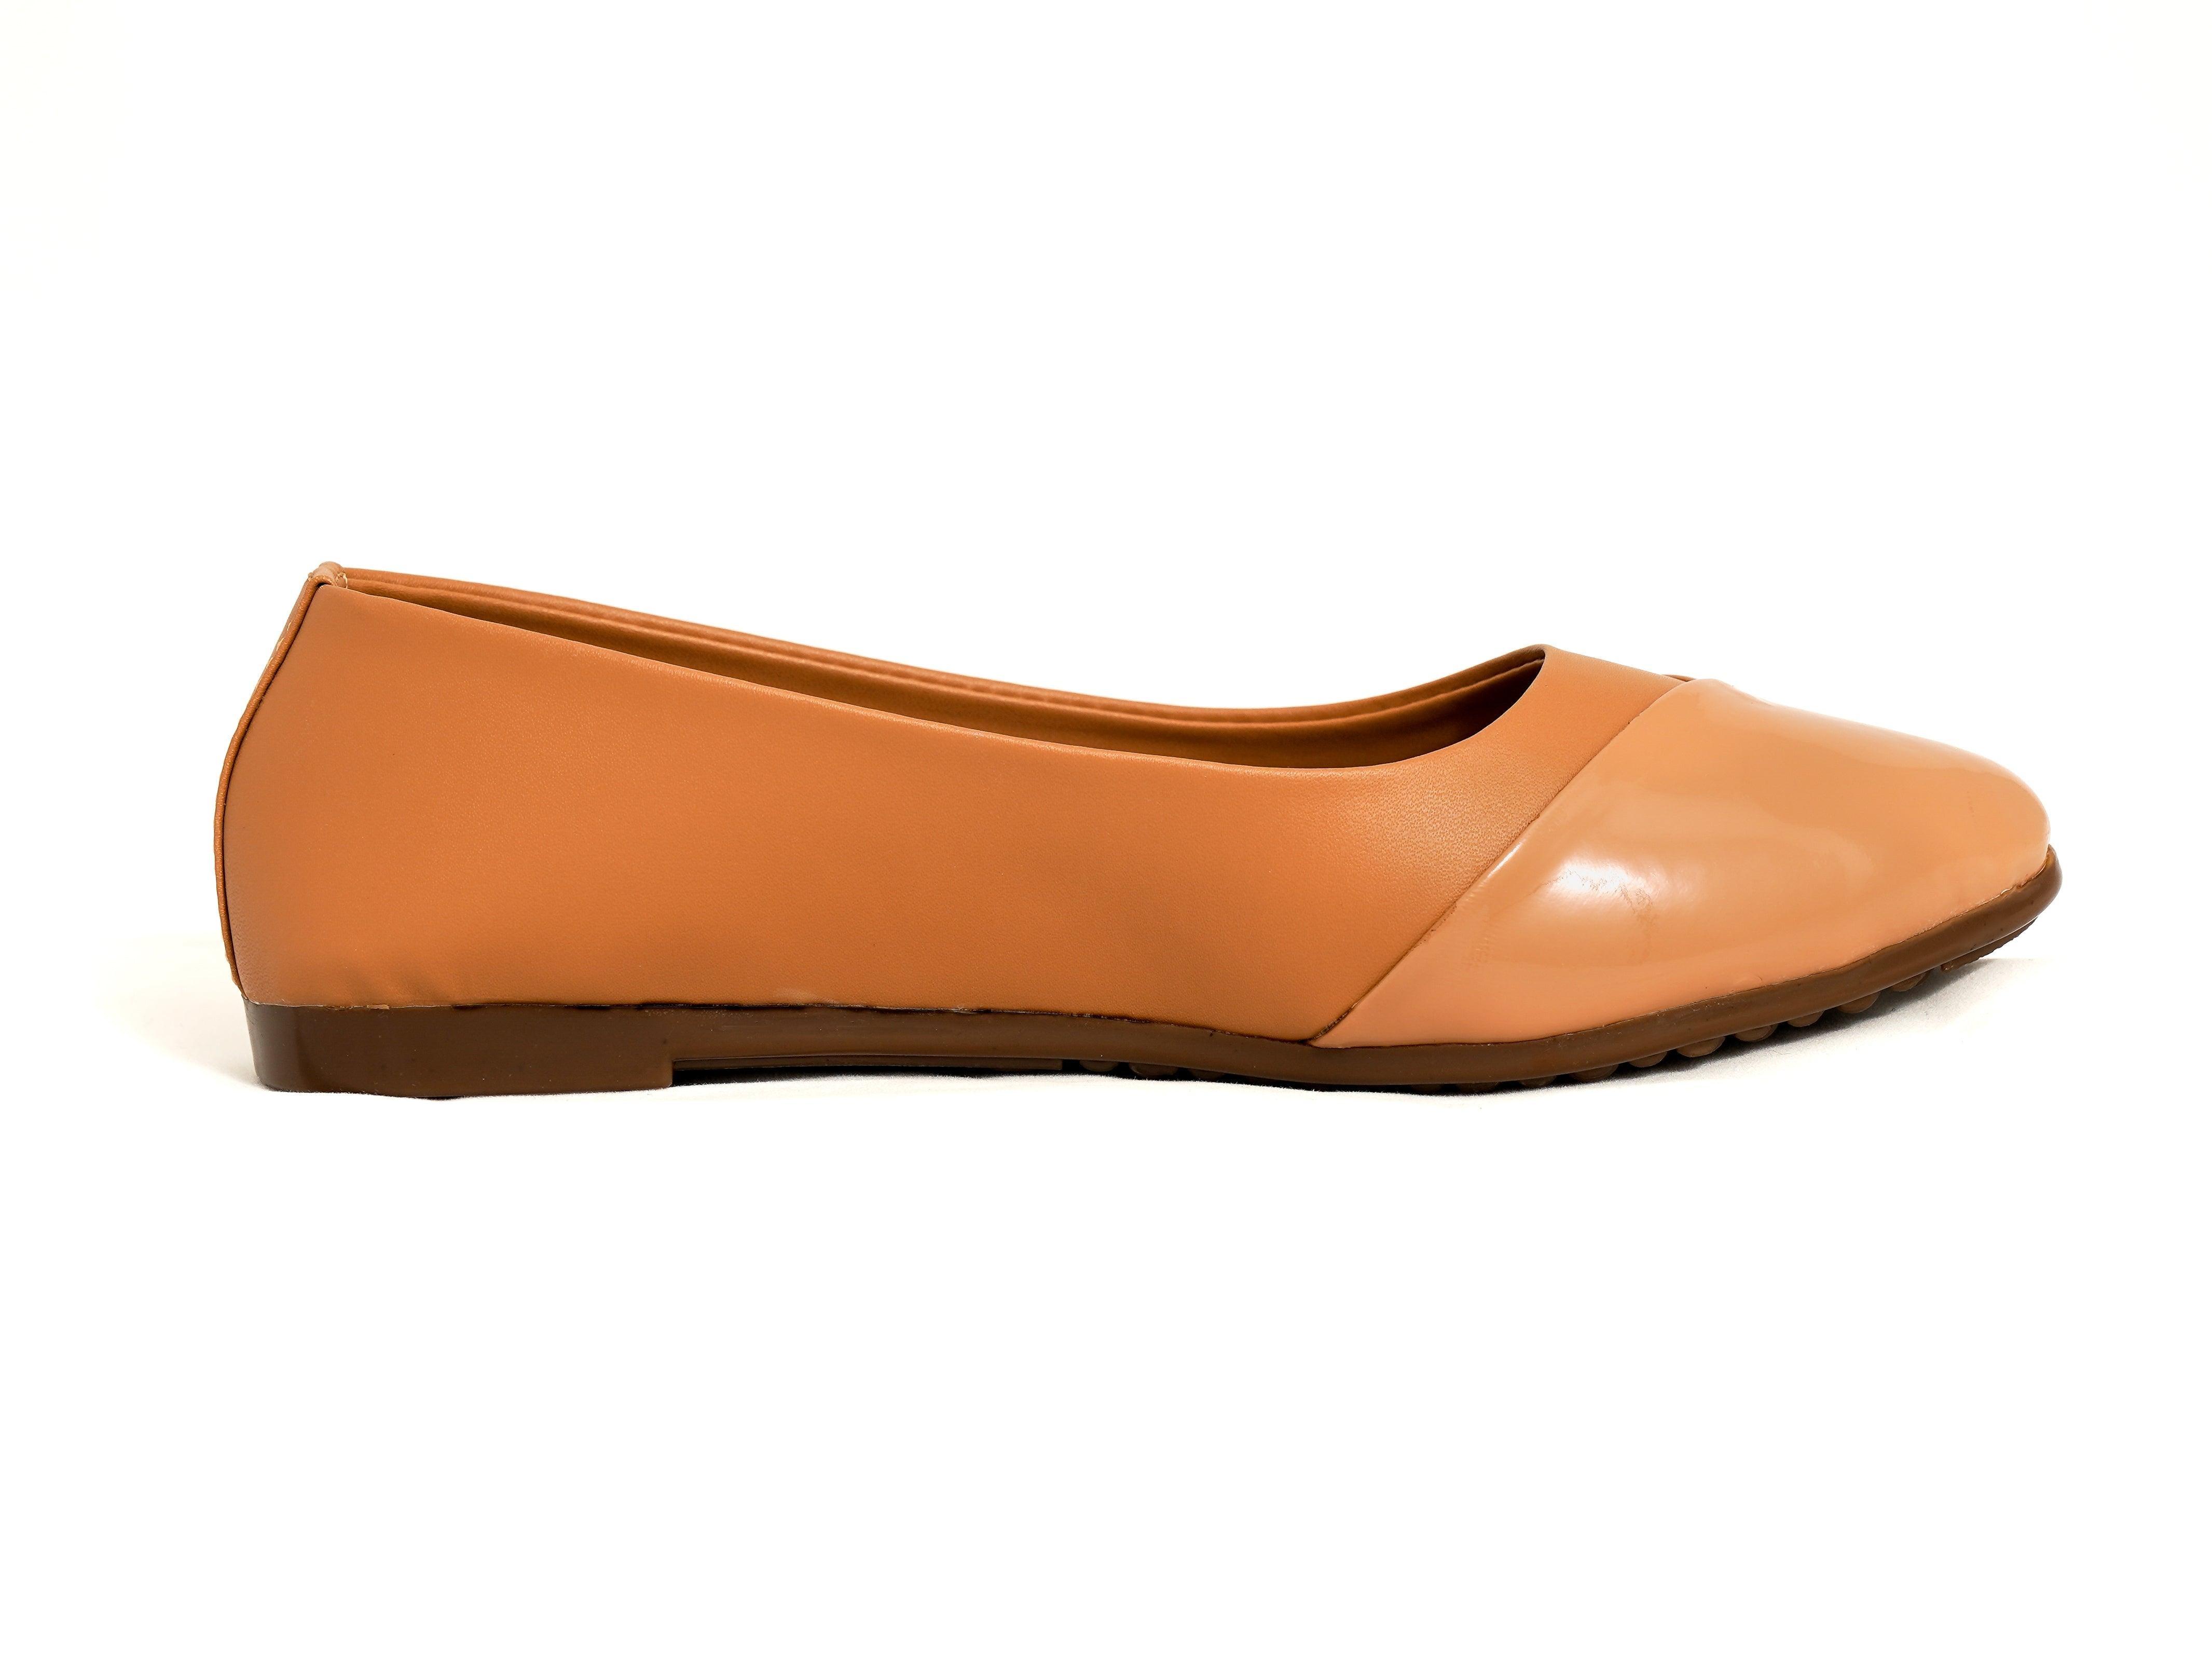 Ladly pointed tan colour Womens low heal shoe - www.indiancart.com.au - - - Indian Cart